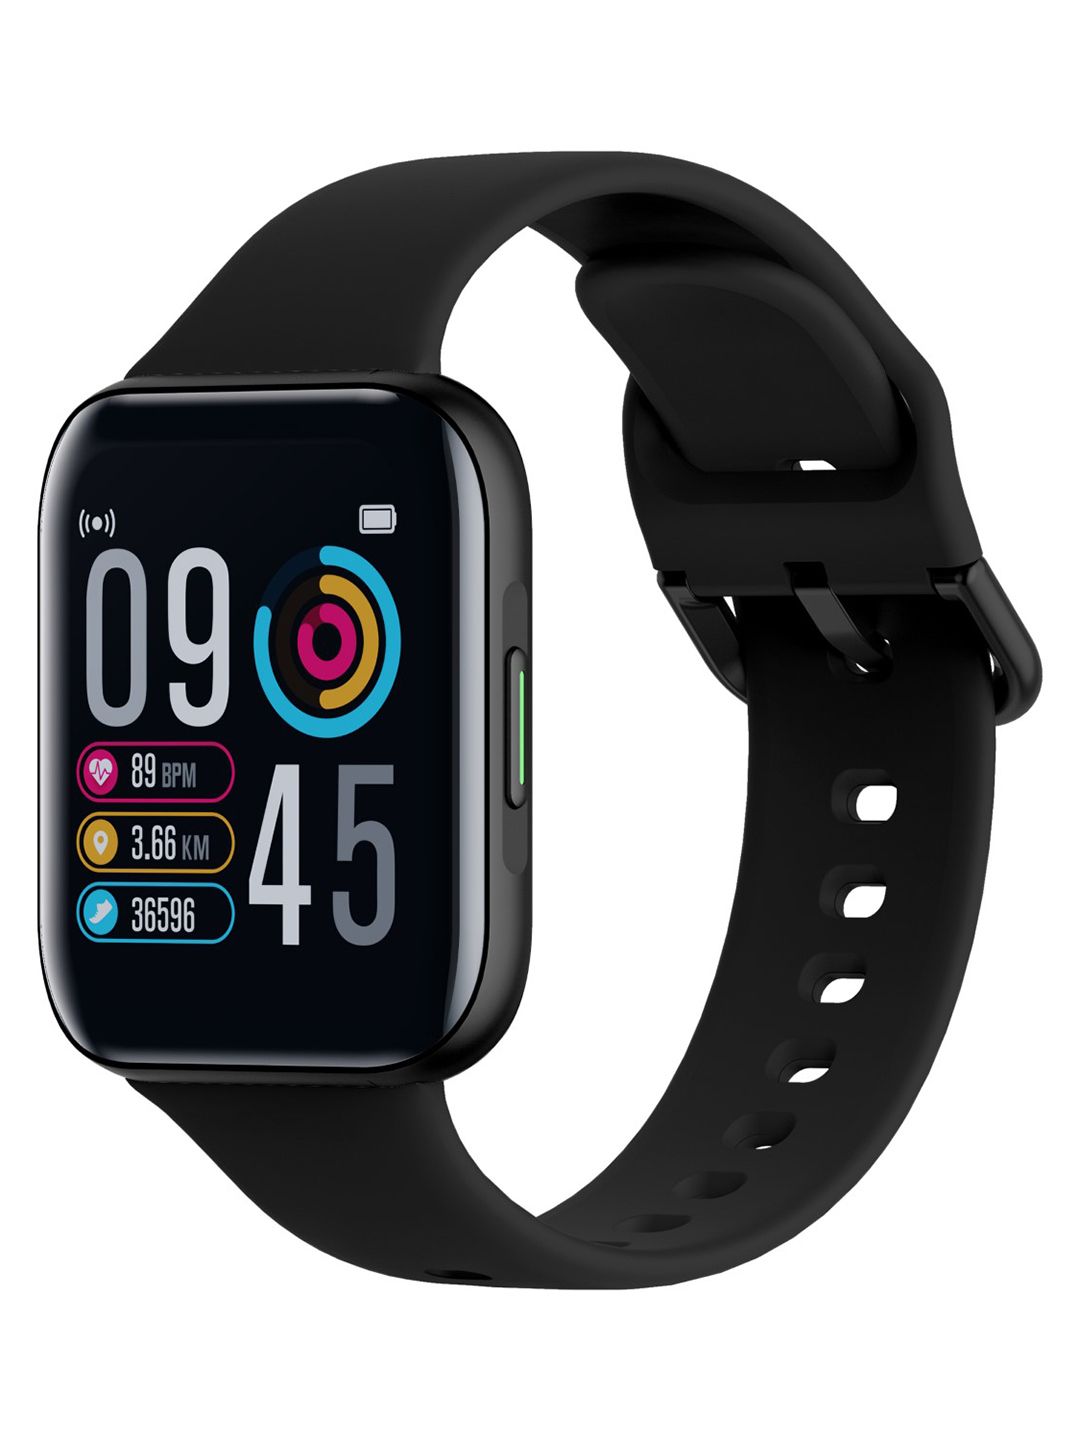 ZEBRONICS Black FIT1220CH Smart Watch Price in India